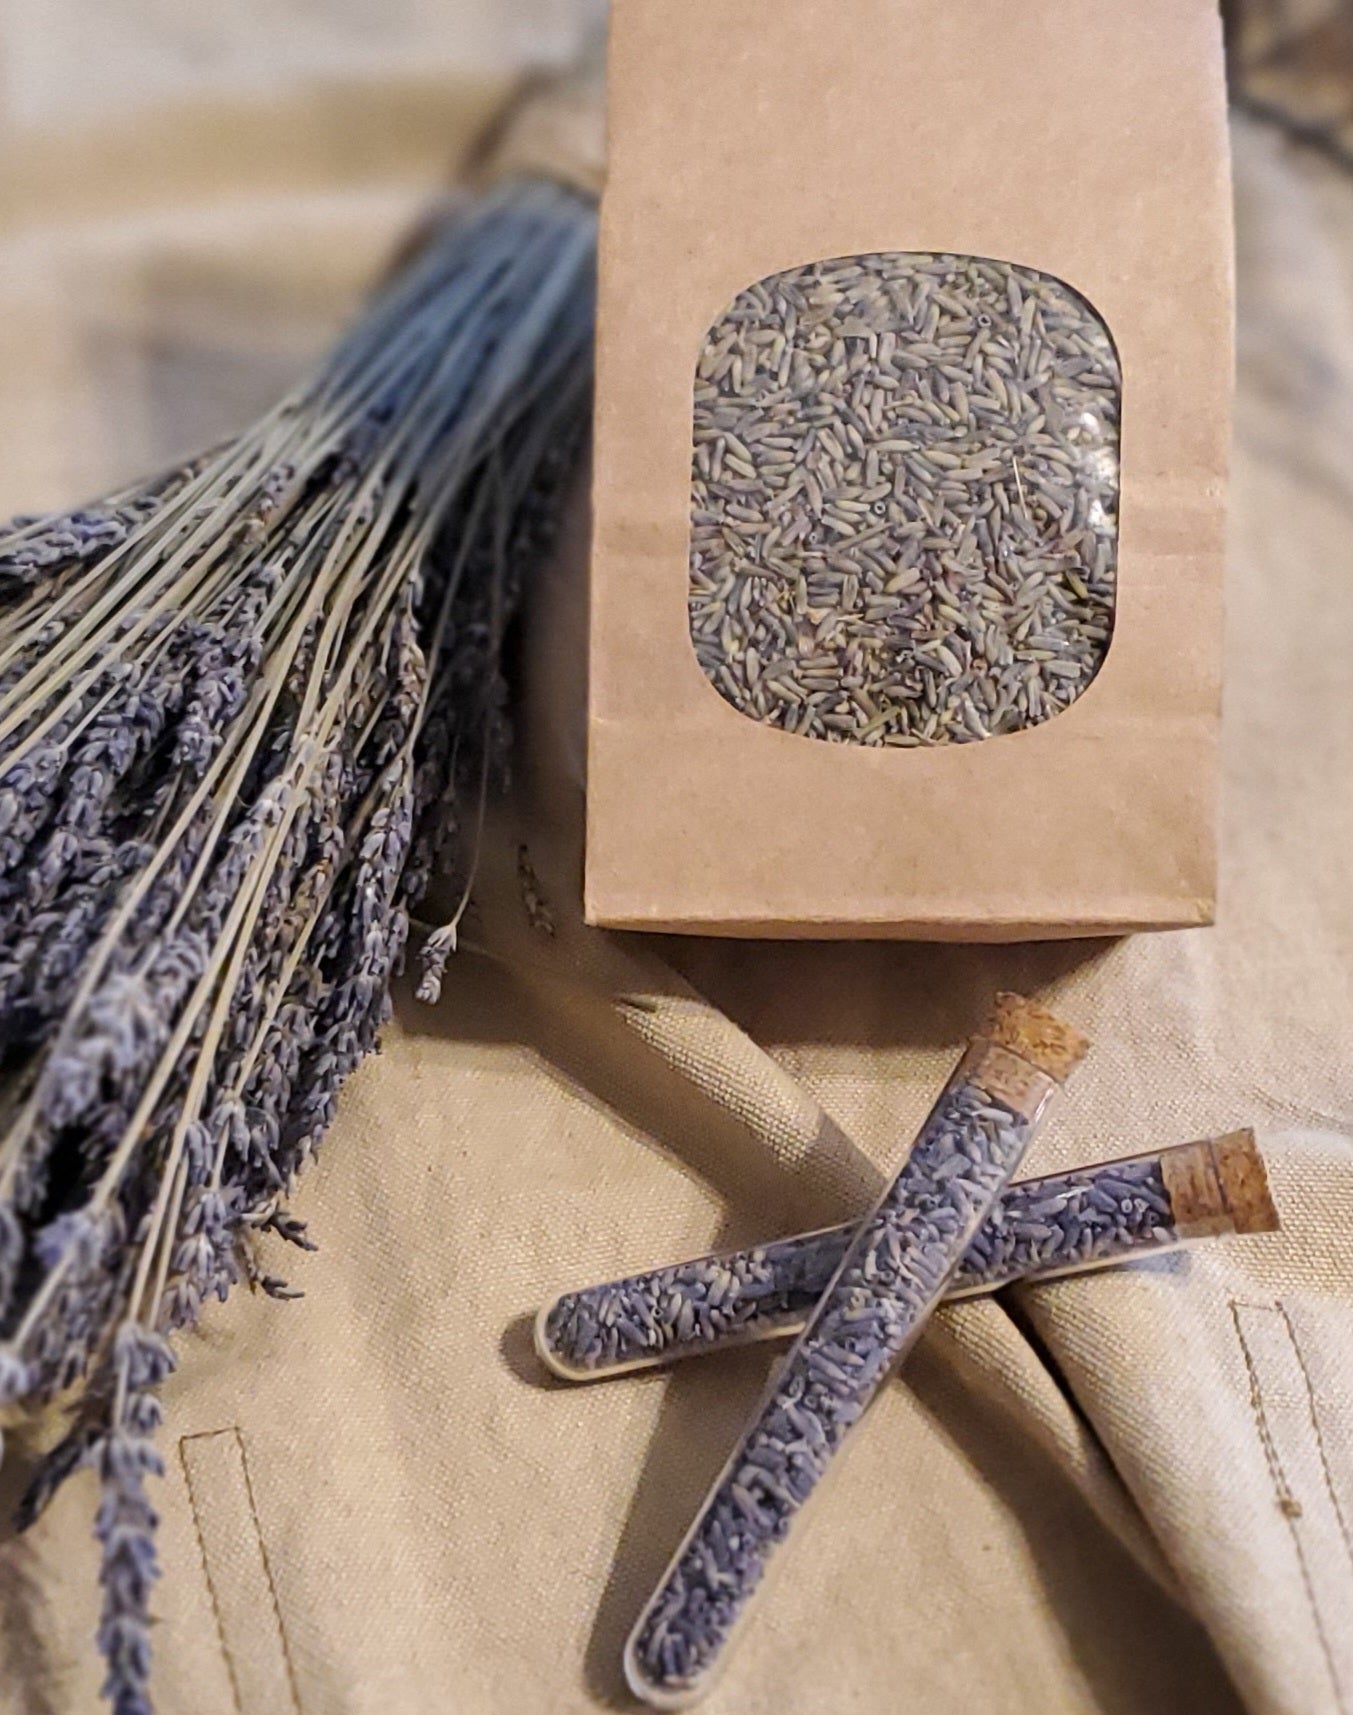 Lavender Herb- Dried Culinary Lavender